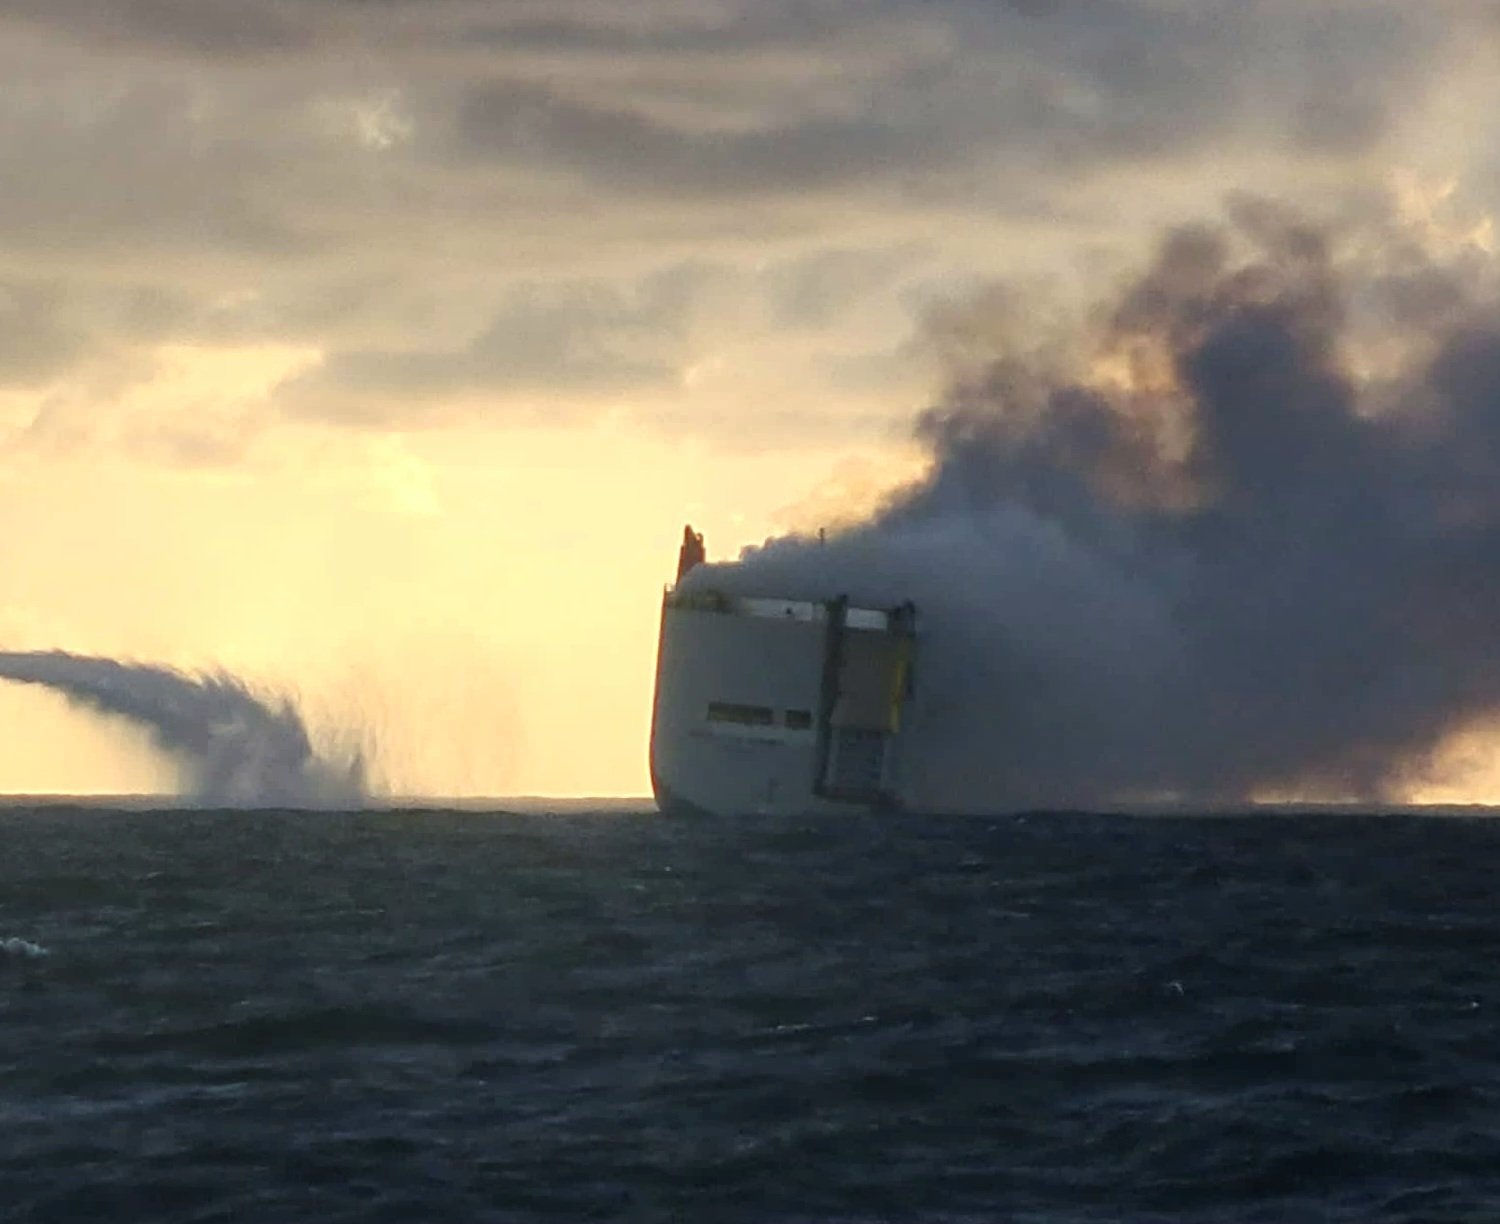 Electric Vehicle about to sink another Cargo Ship